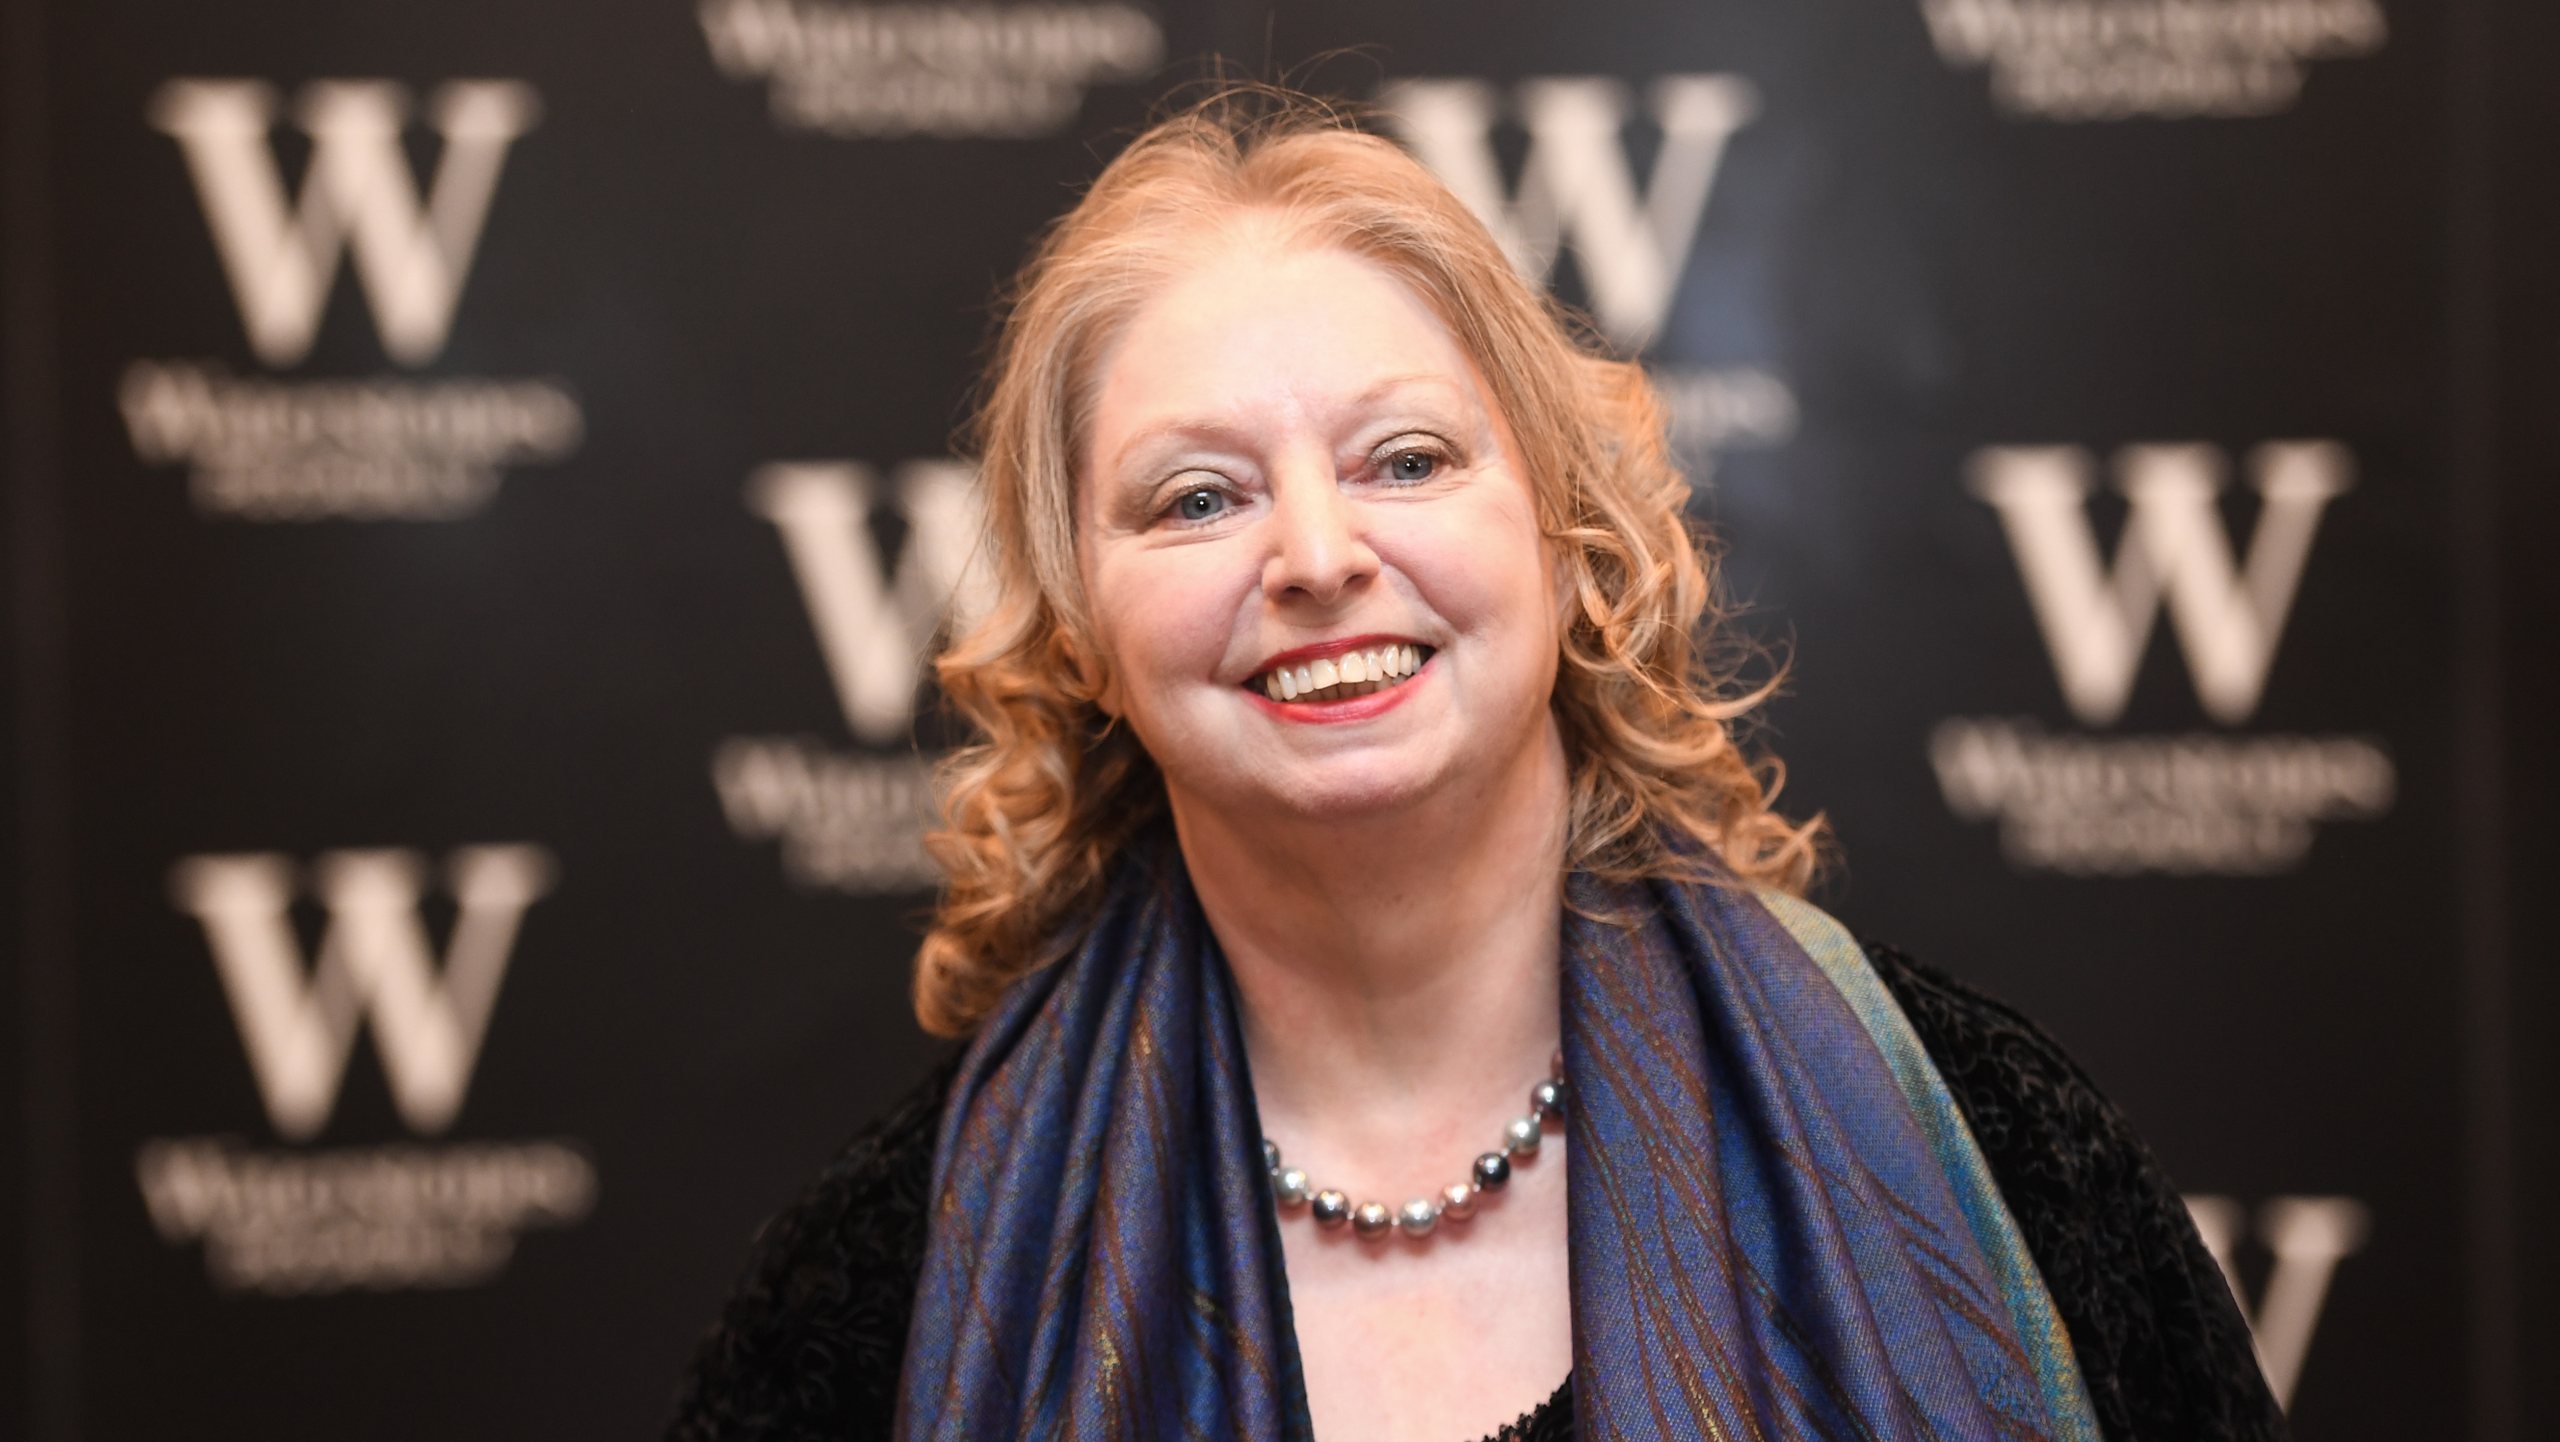 Hilary Mantel Signs Copies Of Her New Book The Mirror And The Light